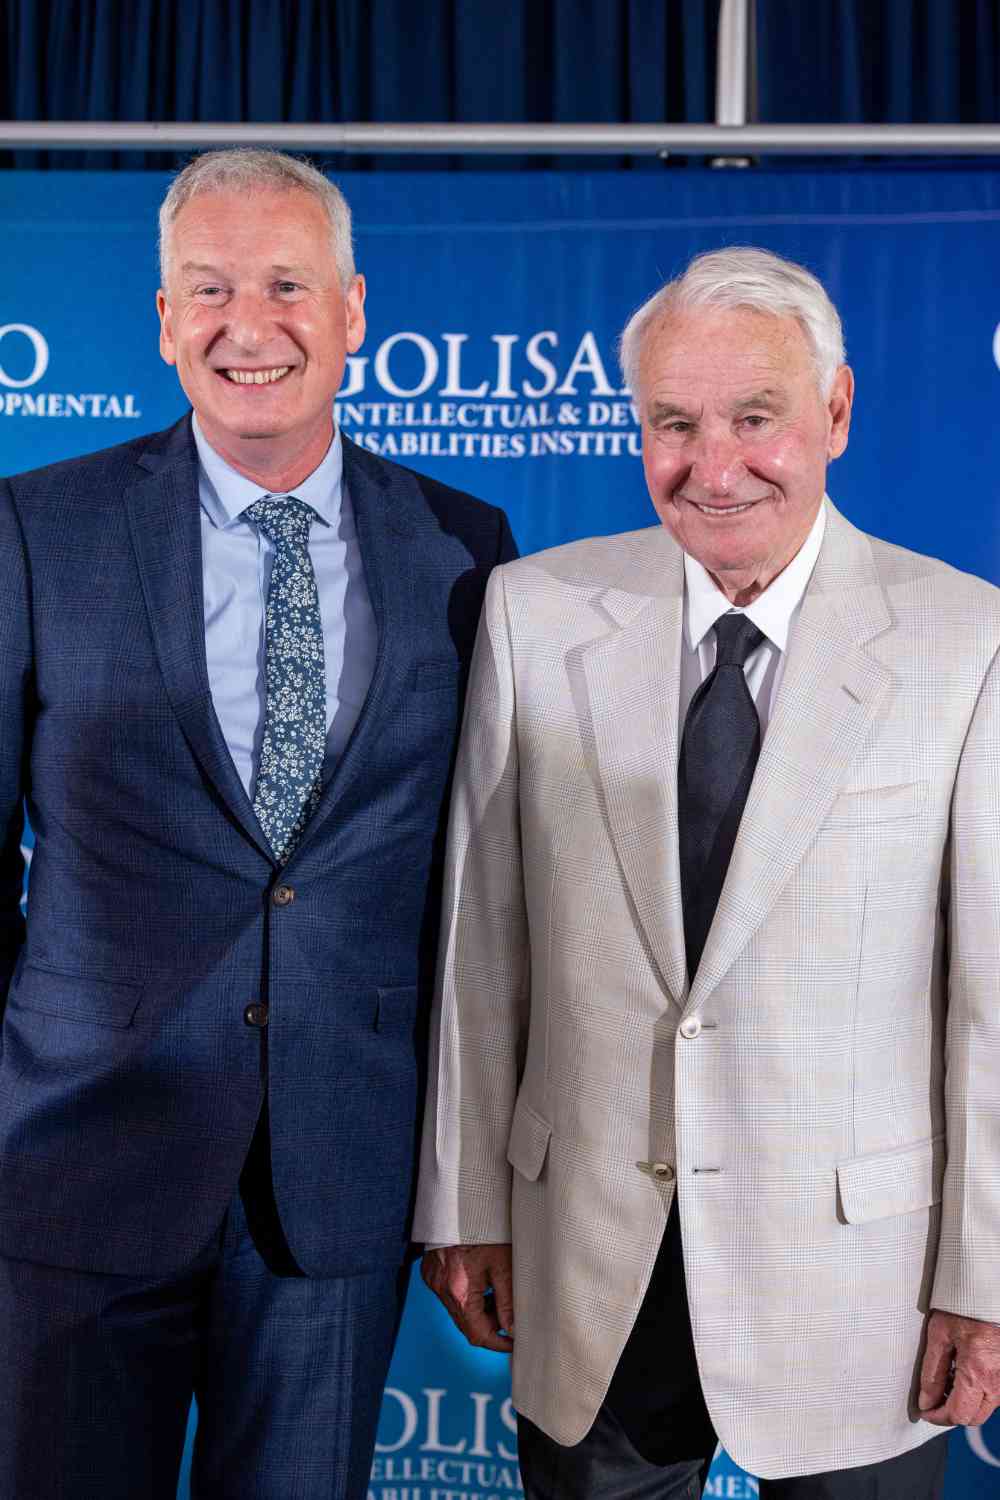 John Foxe and Tom Golisano in front of a blue backdrop featuring the University of Rochester logo for the Golisano Intellectual and Developmental Disabilities Institute. 